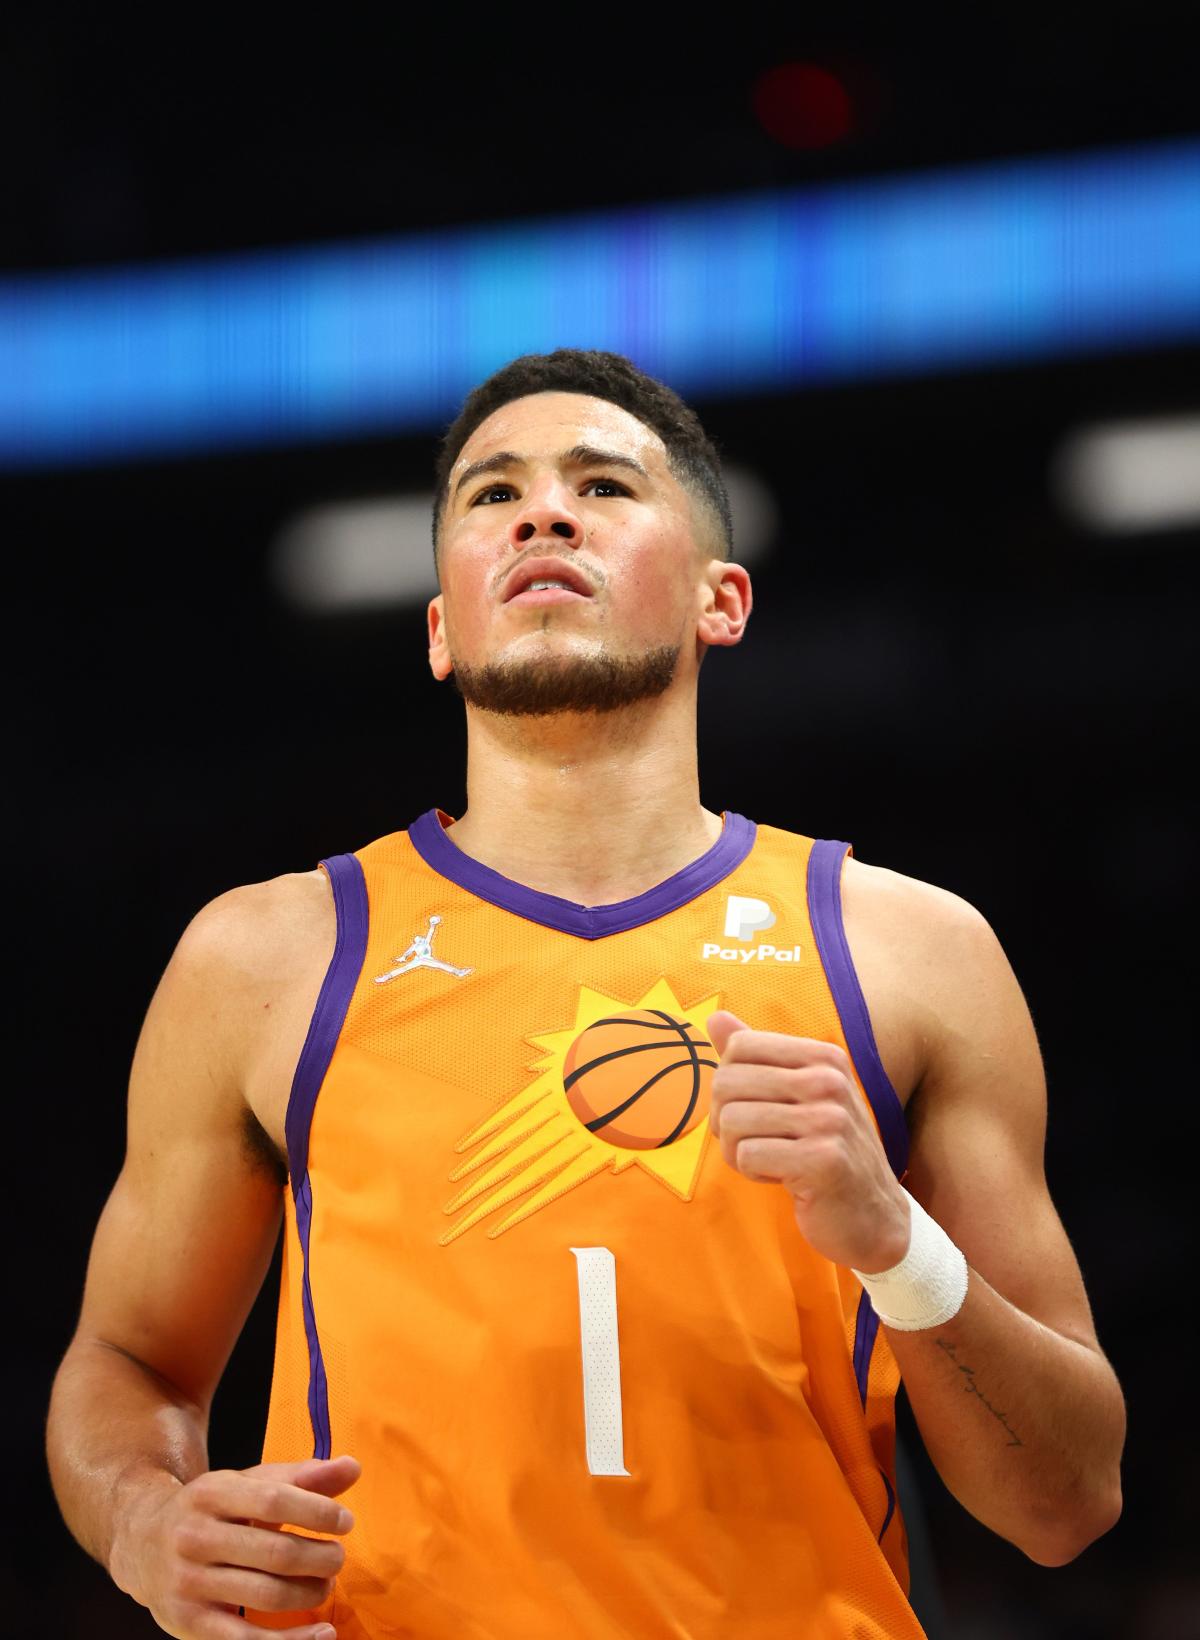 5 takeaways from Suns hitting 20 threes in outlasting TWolves for 9th